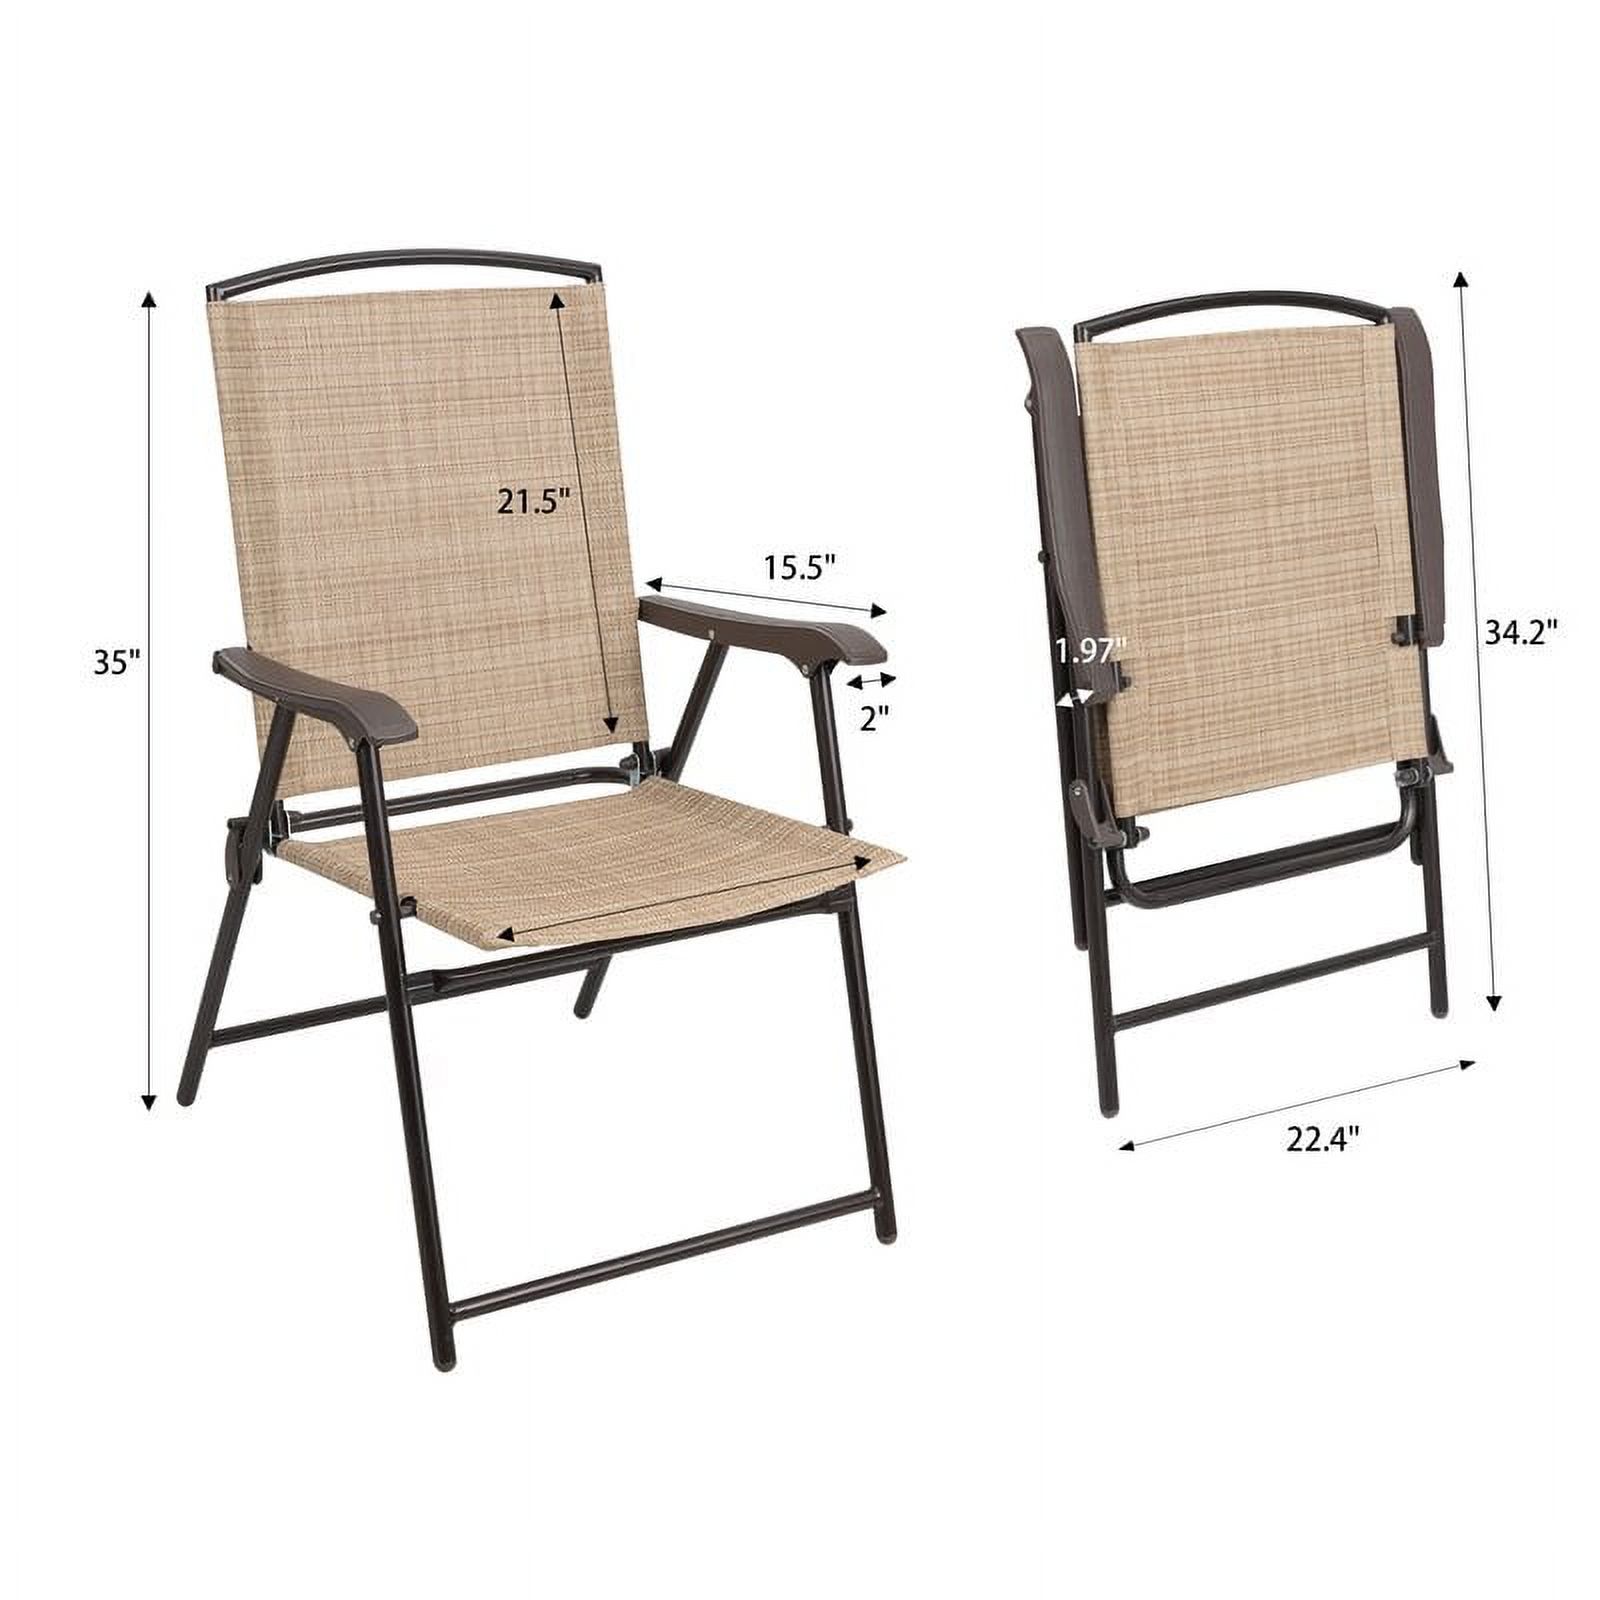 Devoko 2 Pieces Patio Folding Chairs Outdoor Chairs Textilene Furniture Chair Set, Beige - image 4 of 7